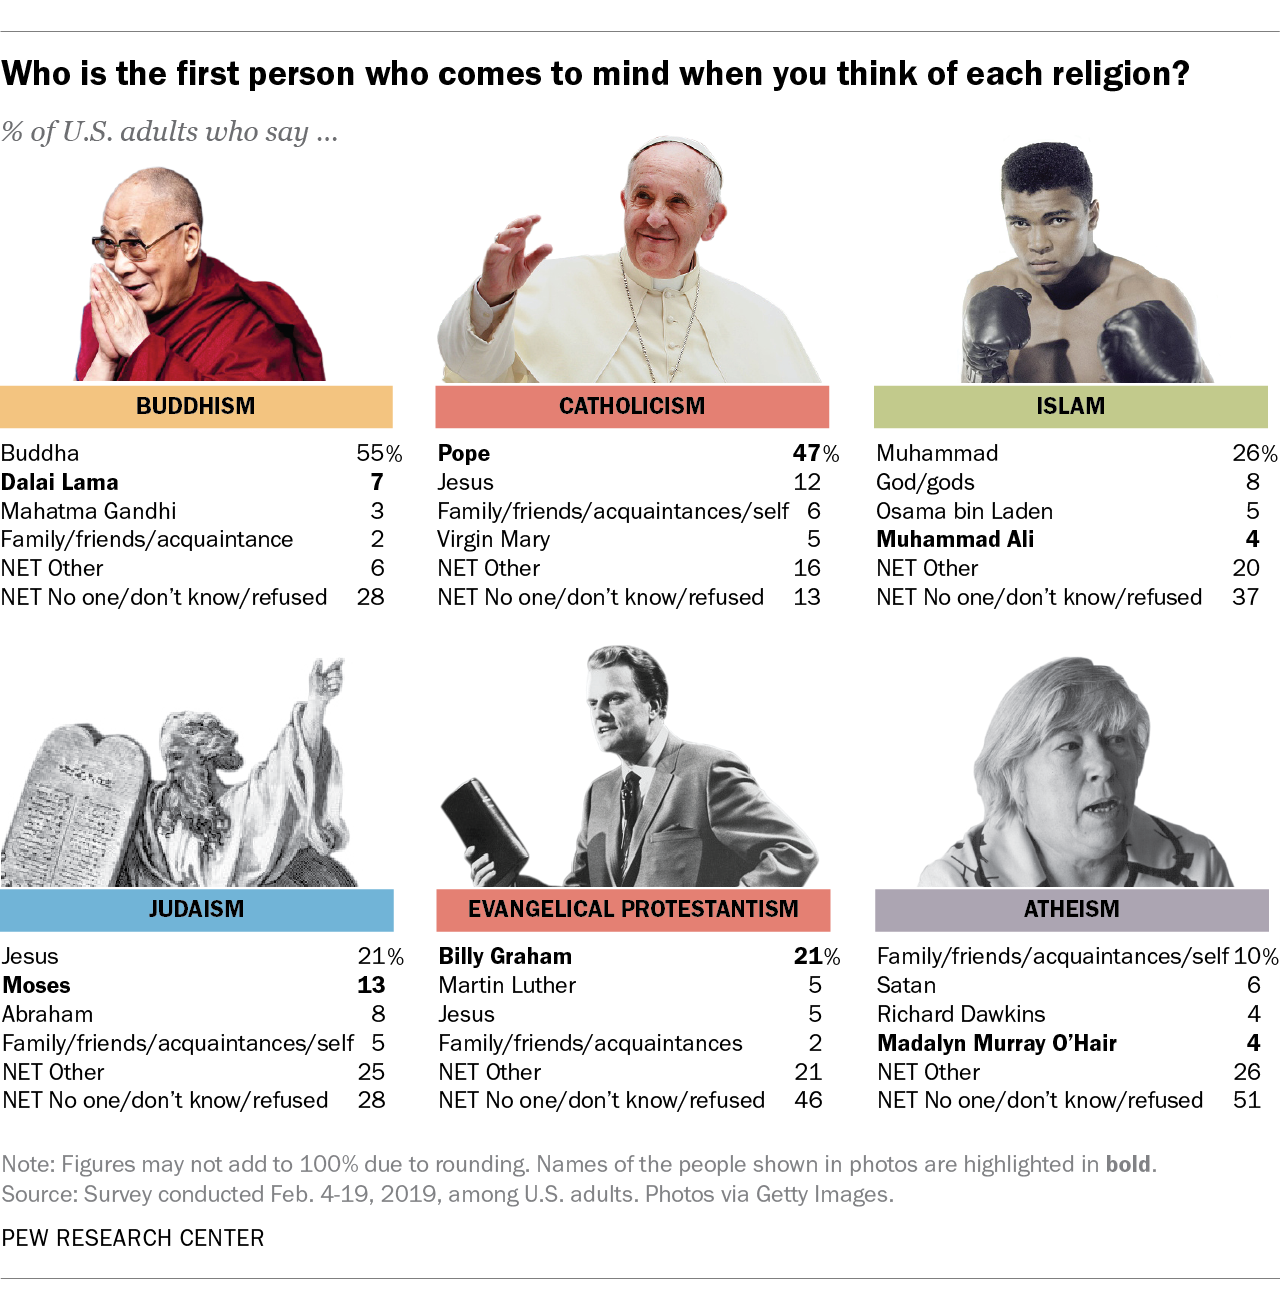 Who comes to mind when Americans think about specific religions? Pew